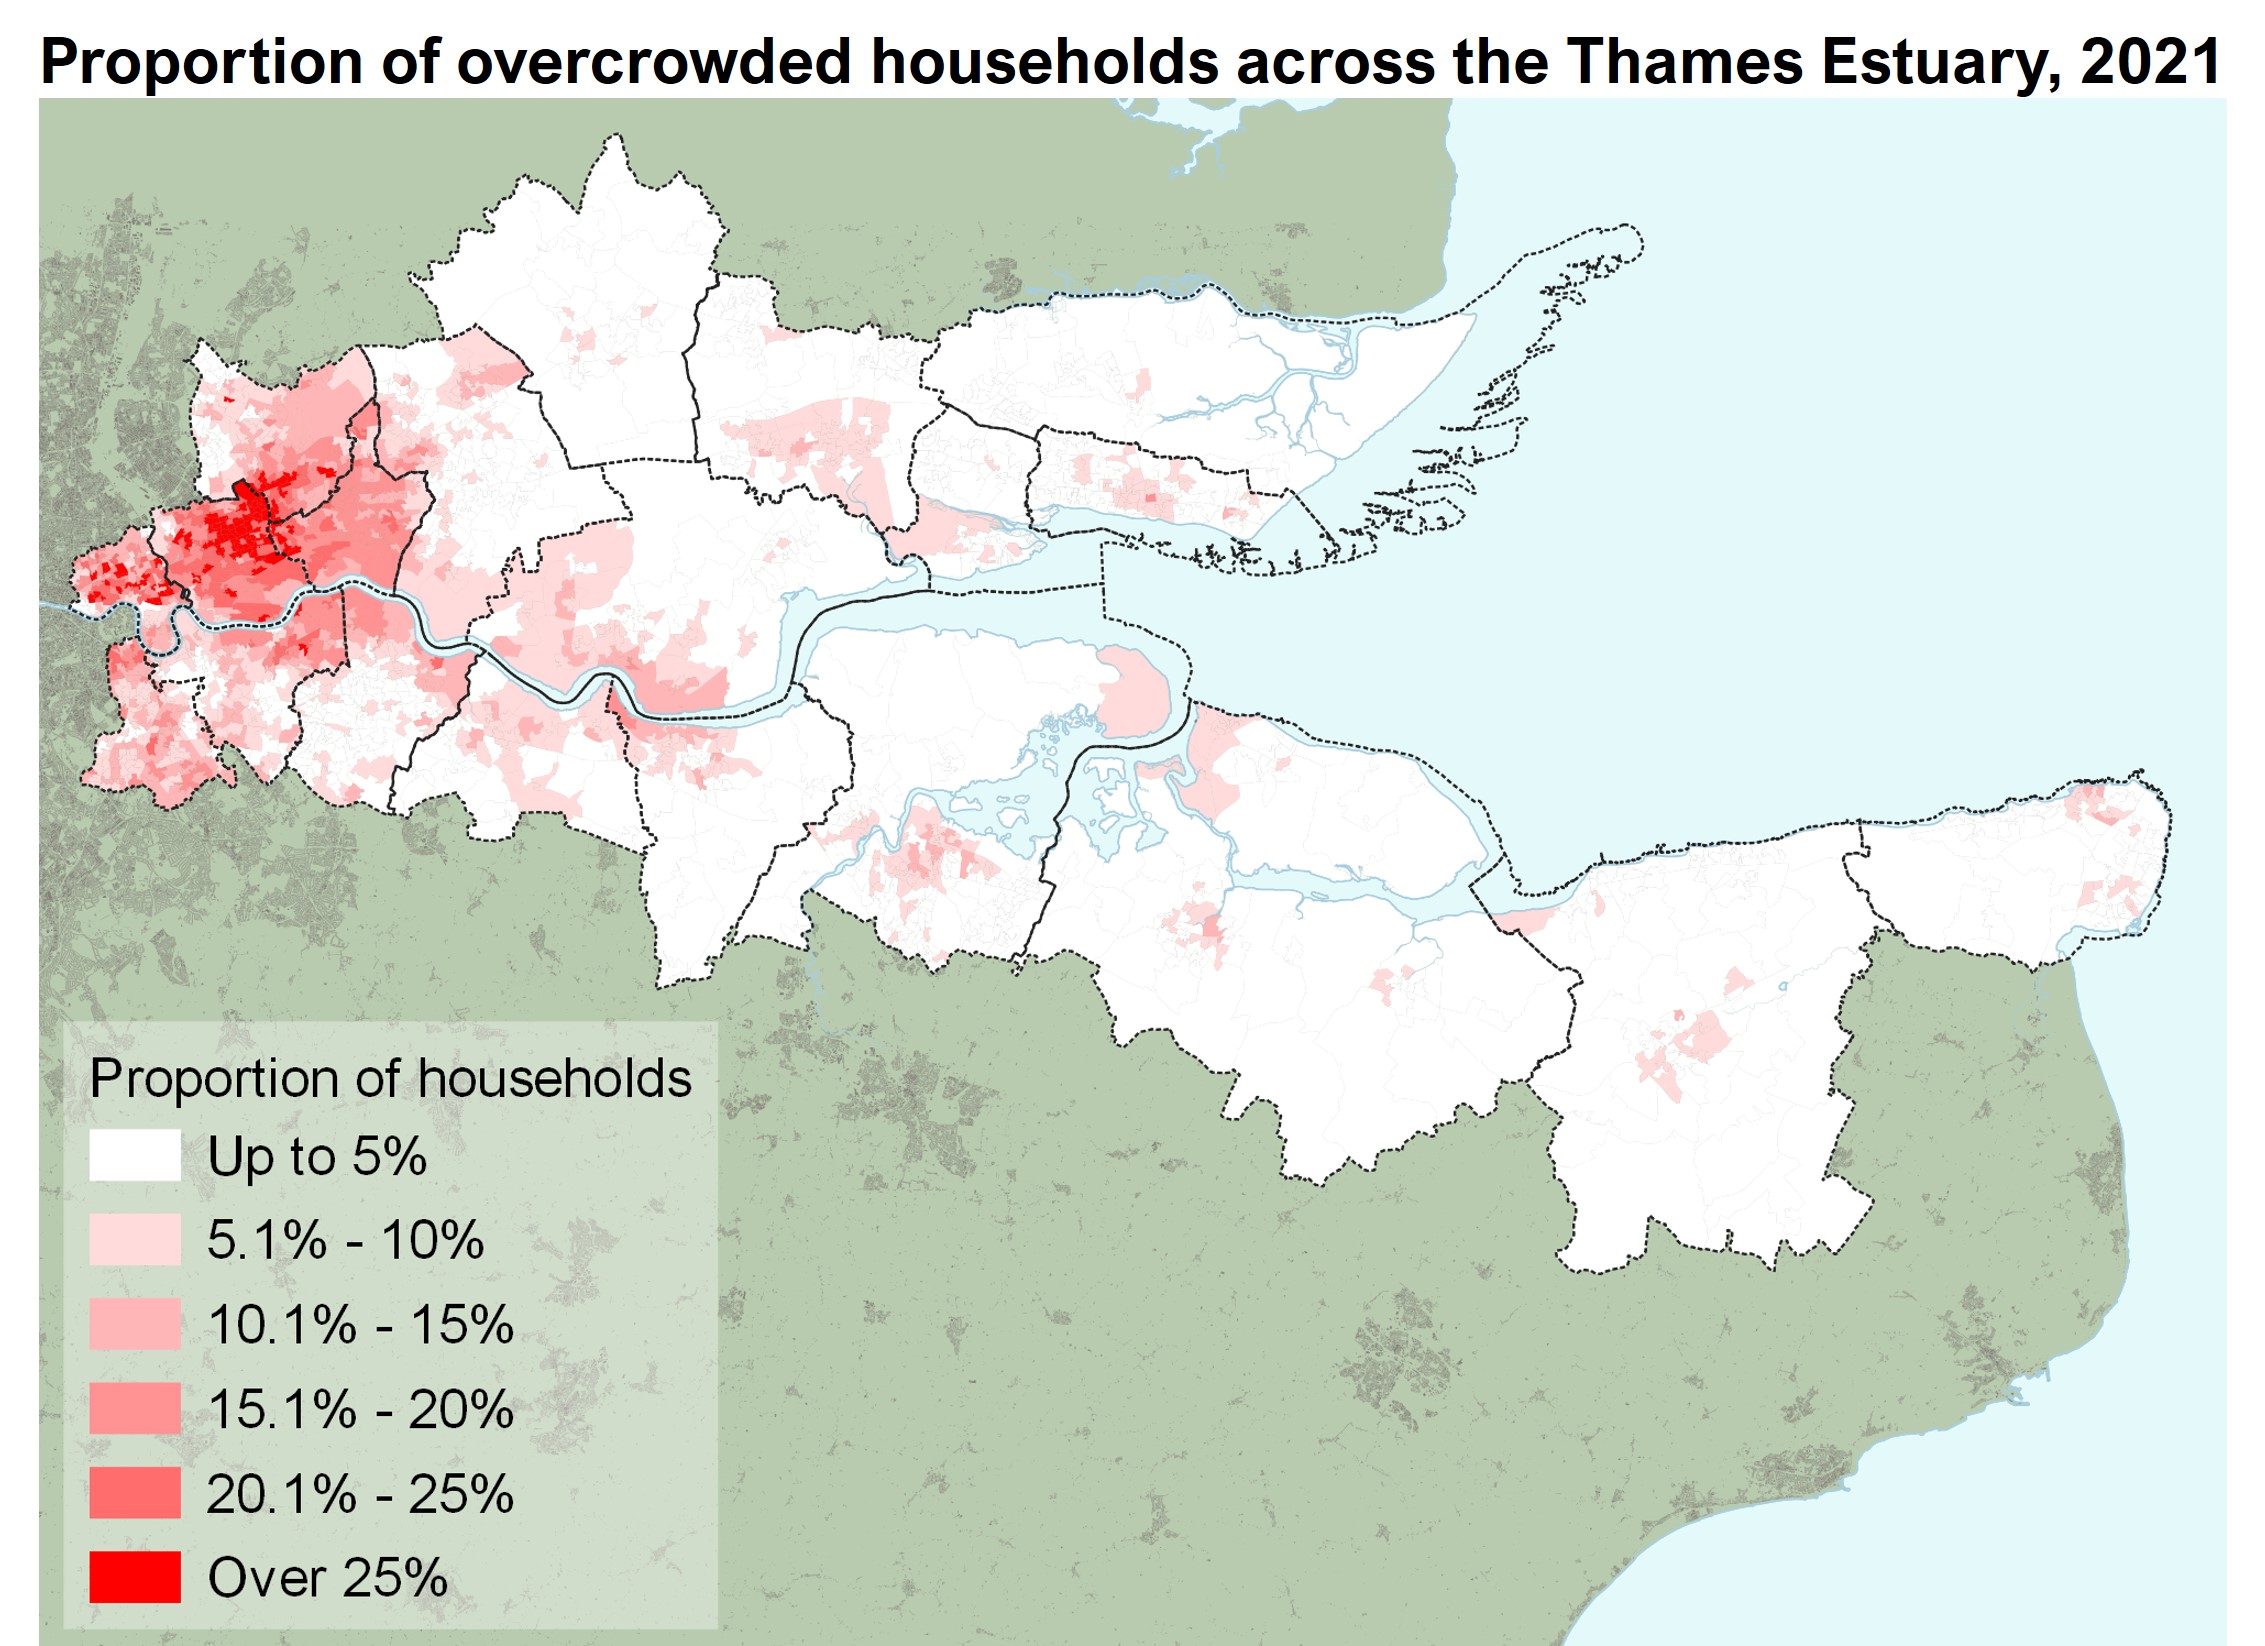 a map of the thames estuary with small areas coloured by the proportion of households that are overcrowded. the highest proportions of overcrowding occur in the London boroughs of Tower Hamlets and Newham, where in some places 25% of households are overcrowded.